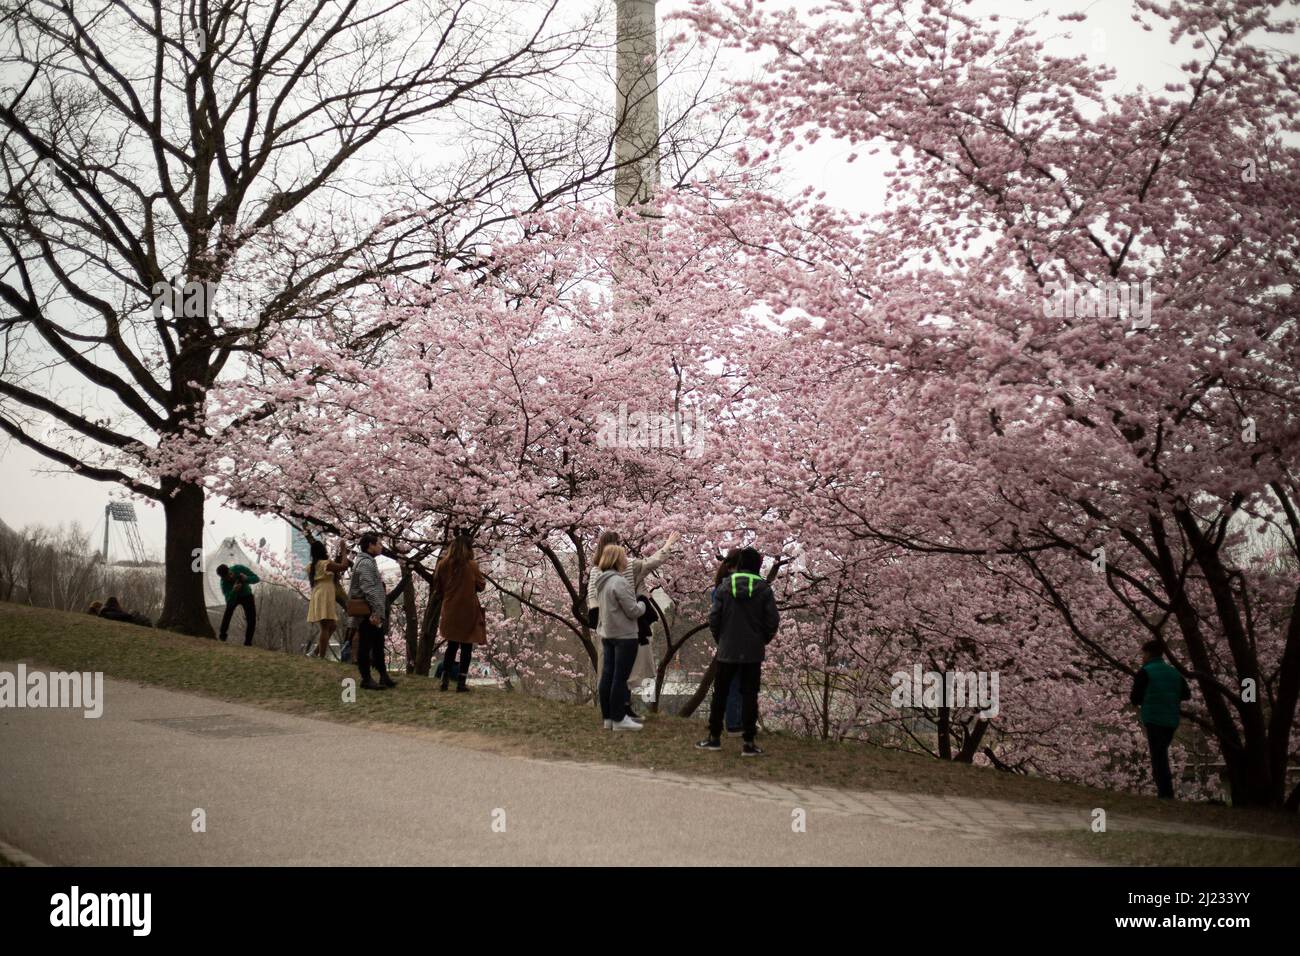 Munich, Germany. 29th Mar, 2022. Many people gather in the Olympic park in Munich, Germany on March 29, 2022 at the cherry blossoms. In the japanese culture the time of the cherry blossom is a highlight of the calendar and the beginning of the spring. (Photo by Alexander Pohl/Sipa USA) Credit: Sipa USA/Alamy Live News Stock Photo